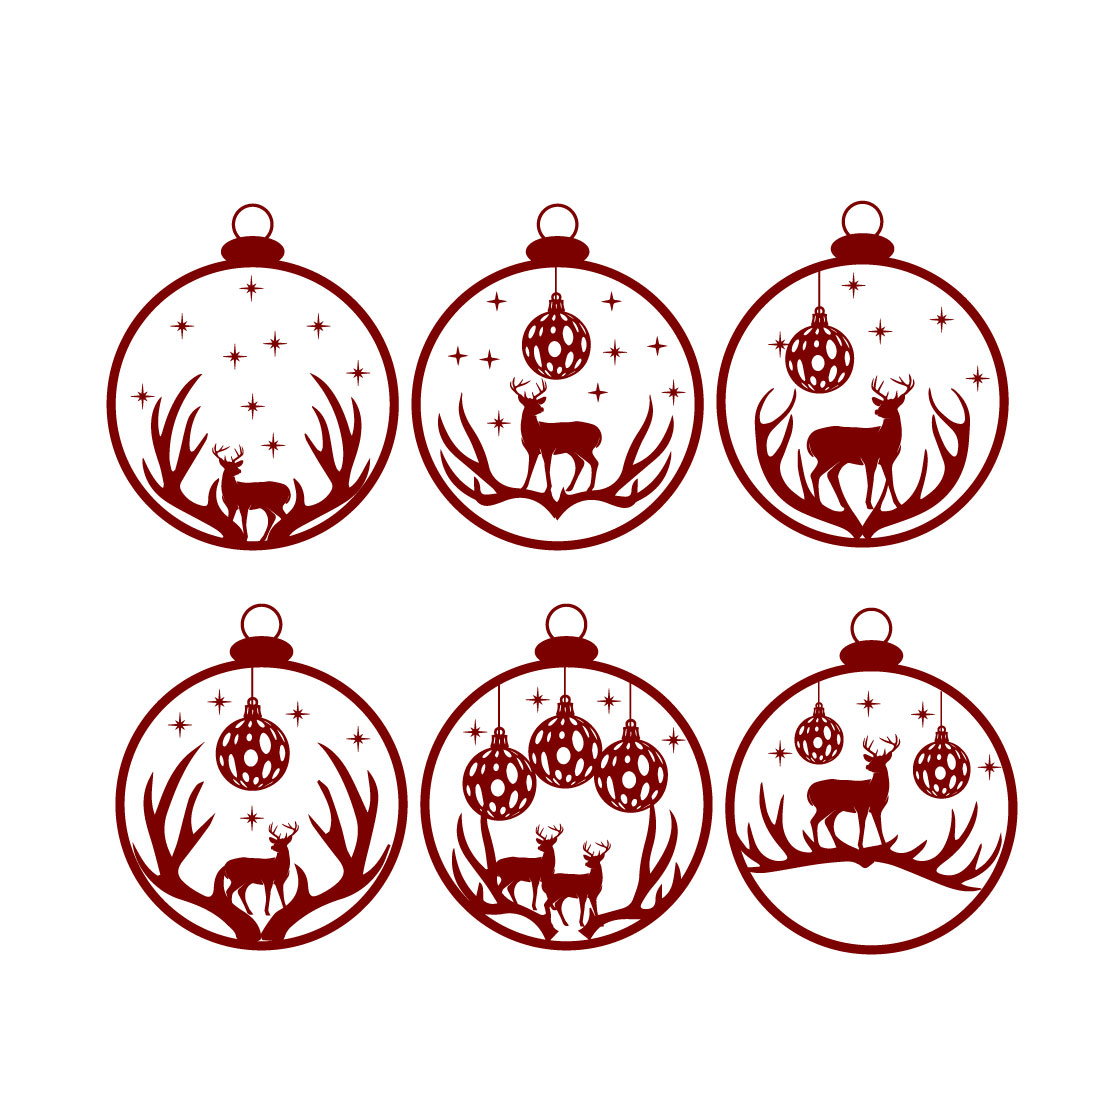 A selection of enchanting images of Christmas ornaments with the image of deer